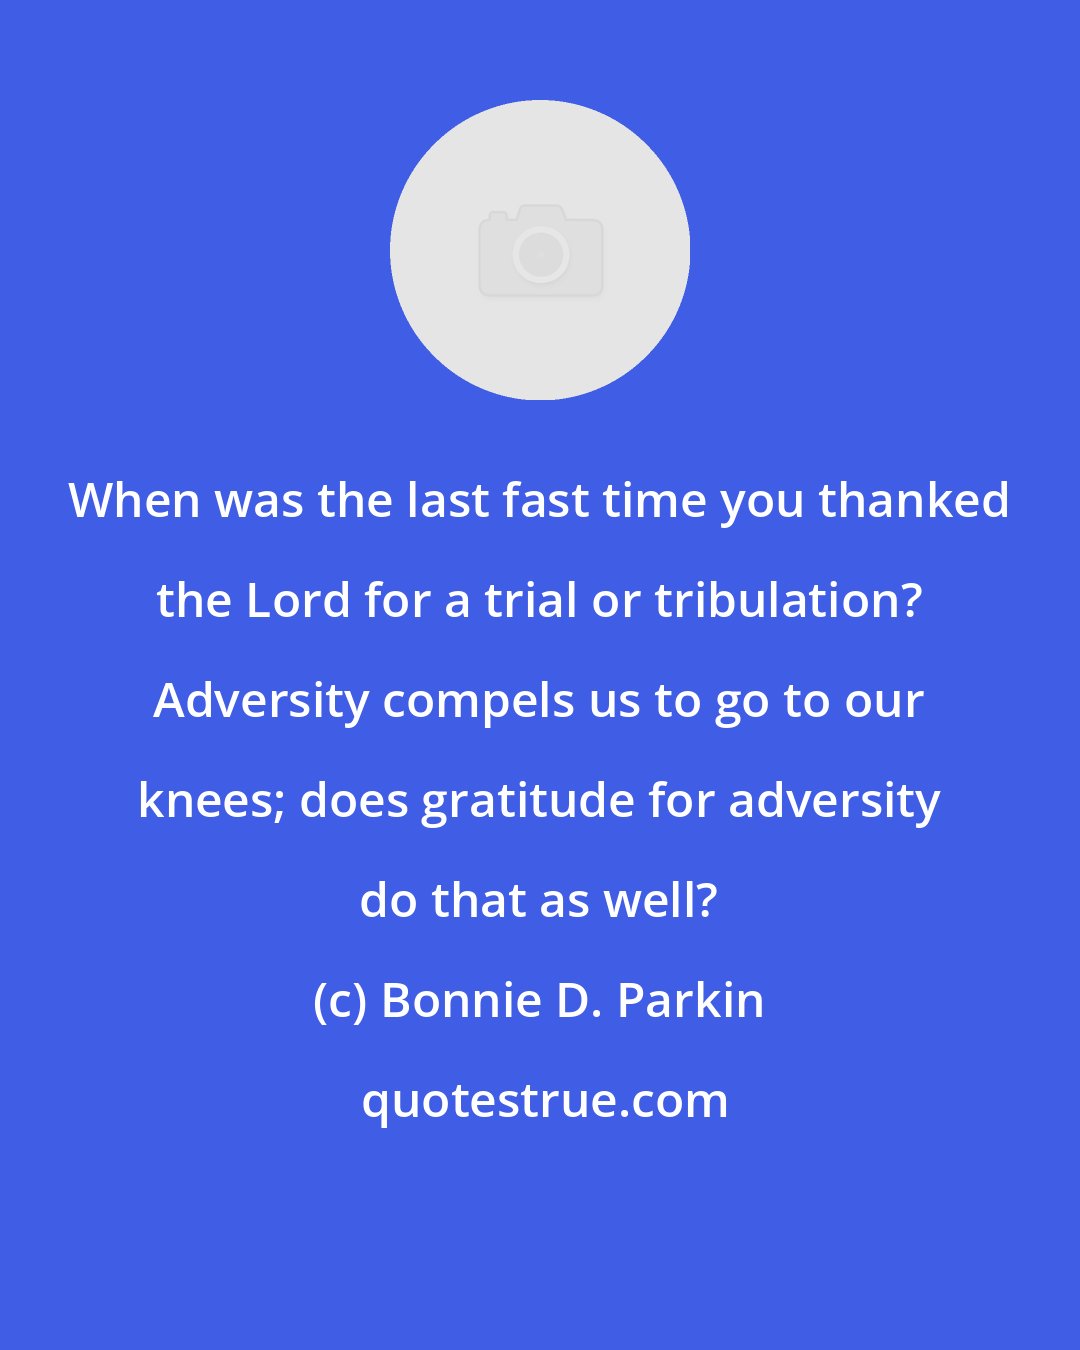 Bonnie D. Parkin: When was the last fast time you thanked the Lord for a trial or tribulation? Adversity compels us to go to our knees; does gratitude for adversity do that as well?